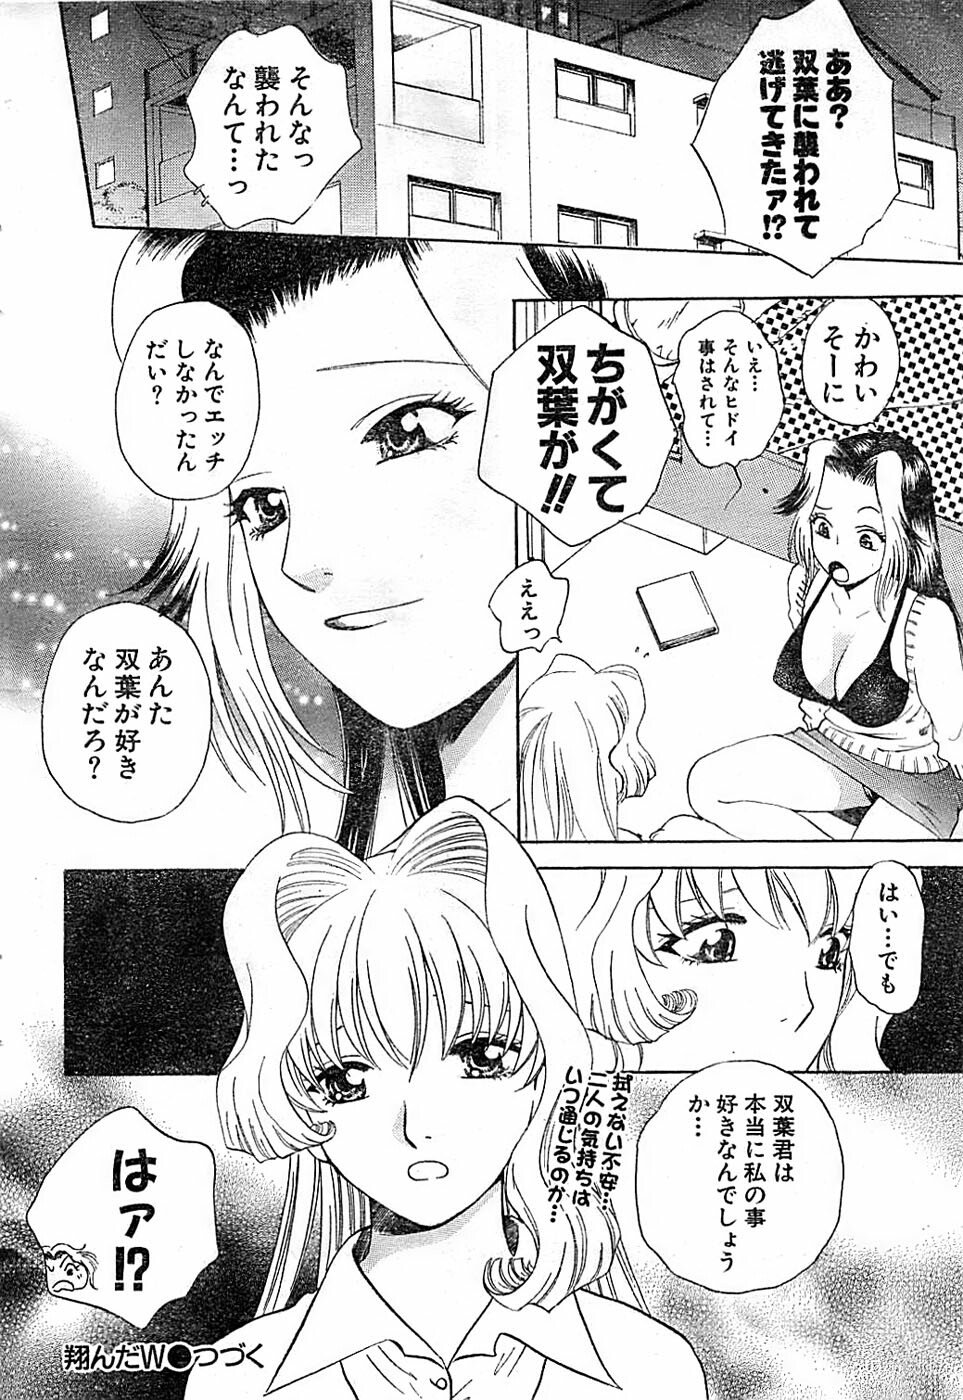 Doki! Special 2006-04 page 34 full